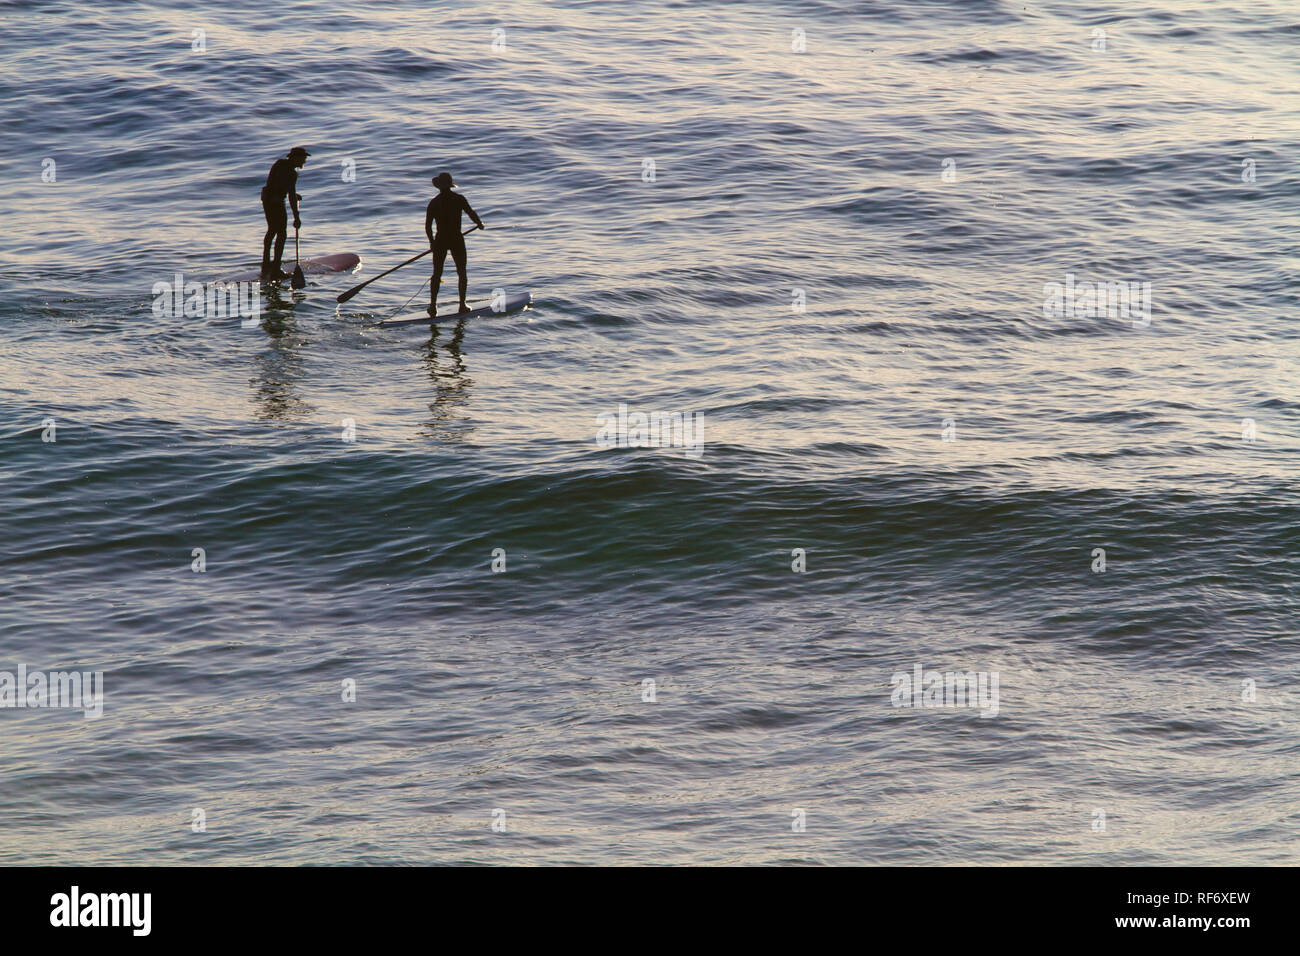 Paddle Boarding in Big Sur Stock Photo